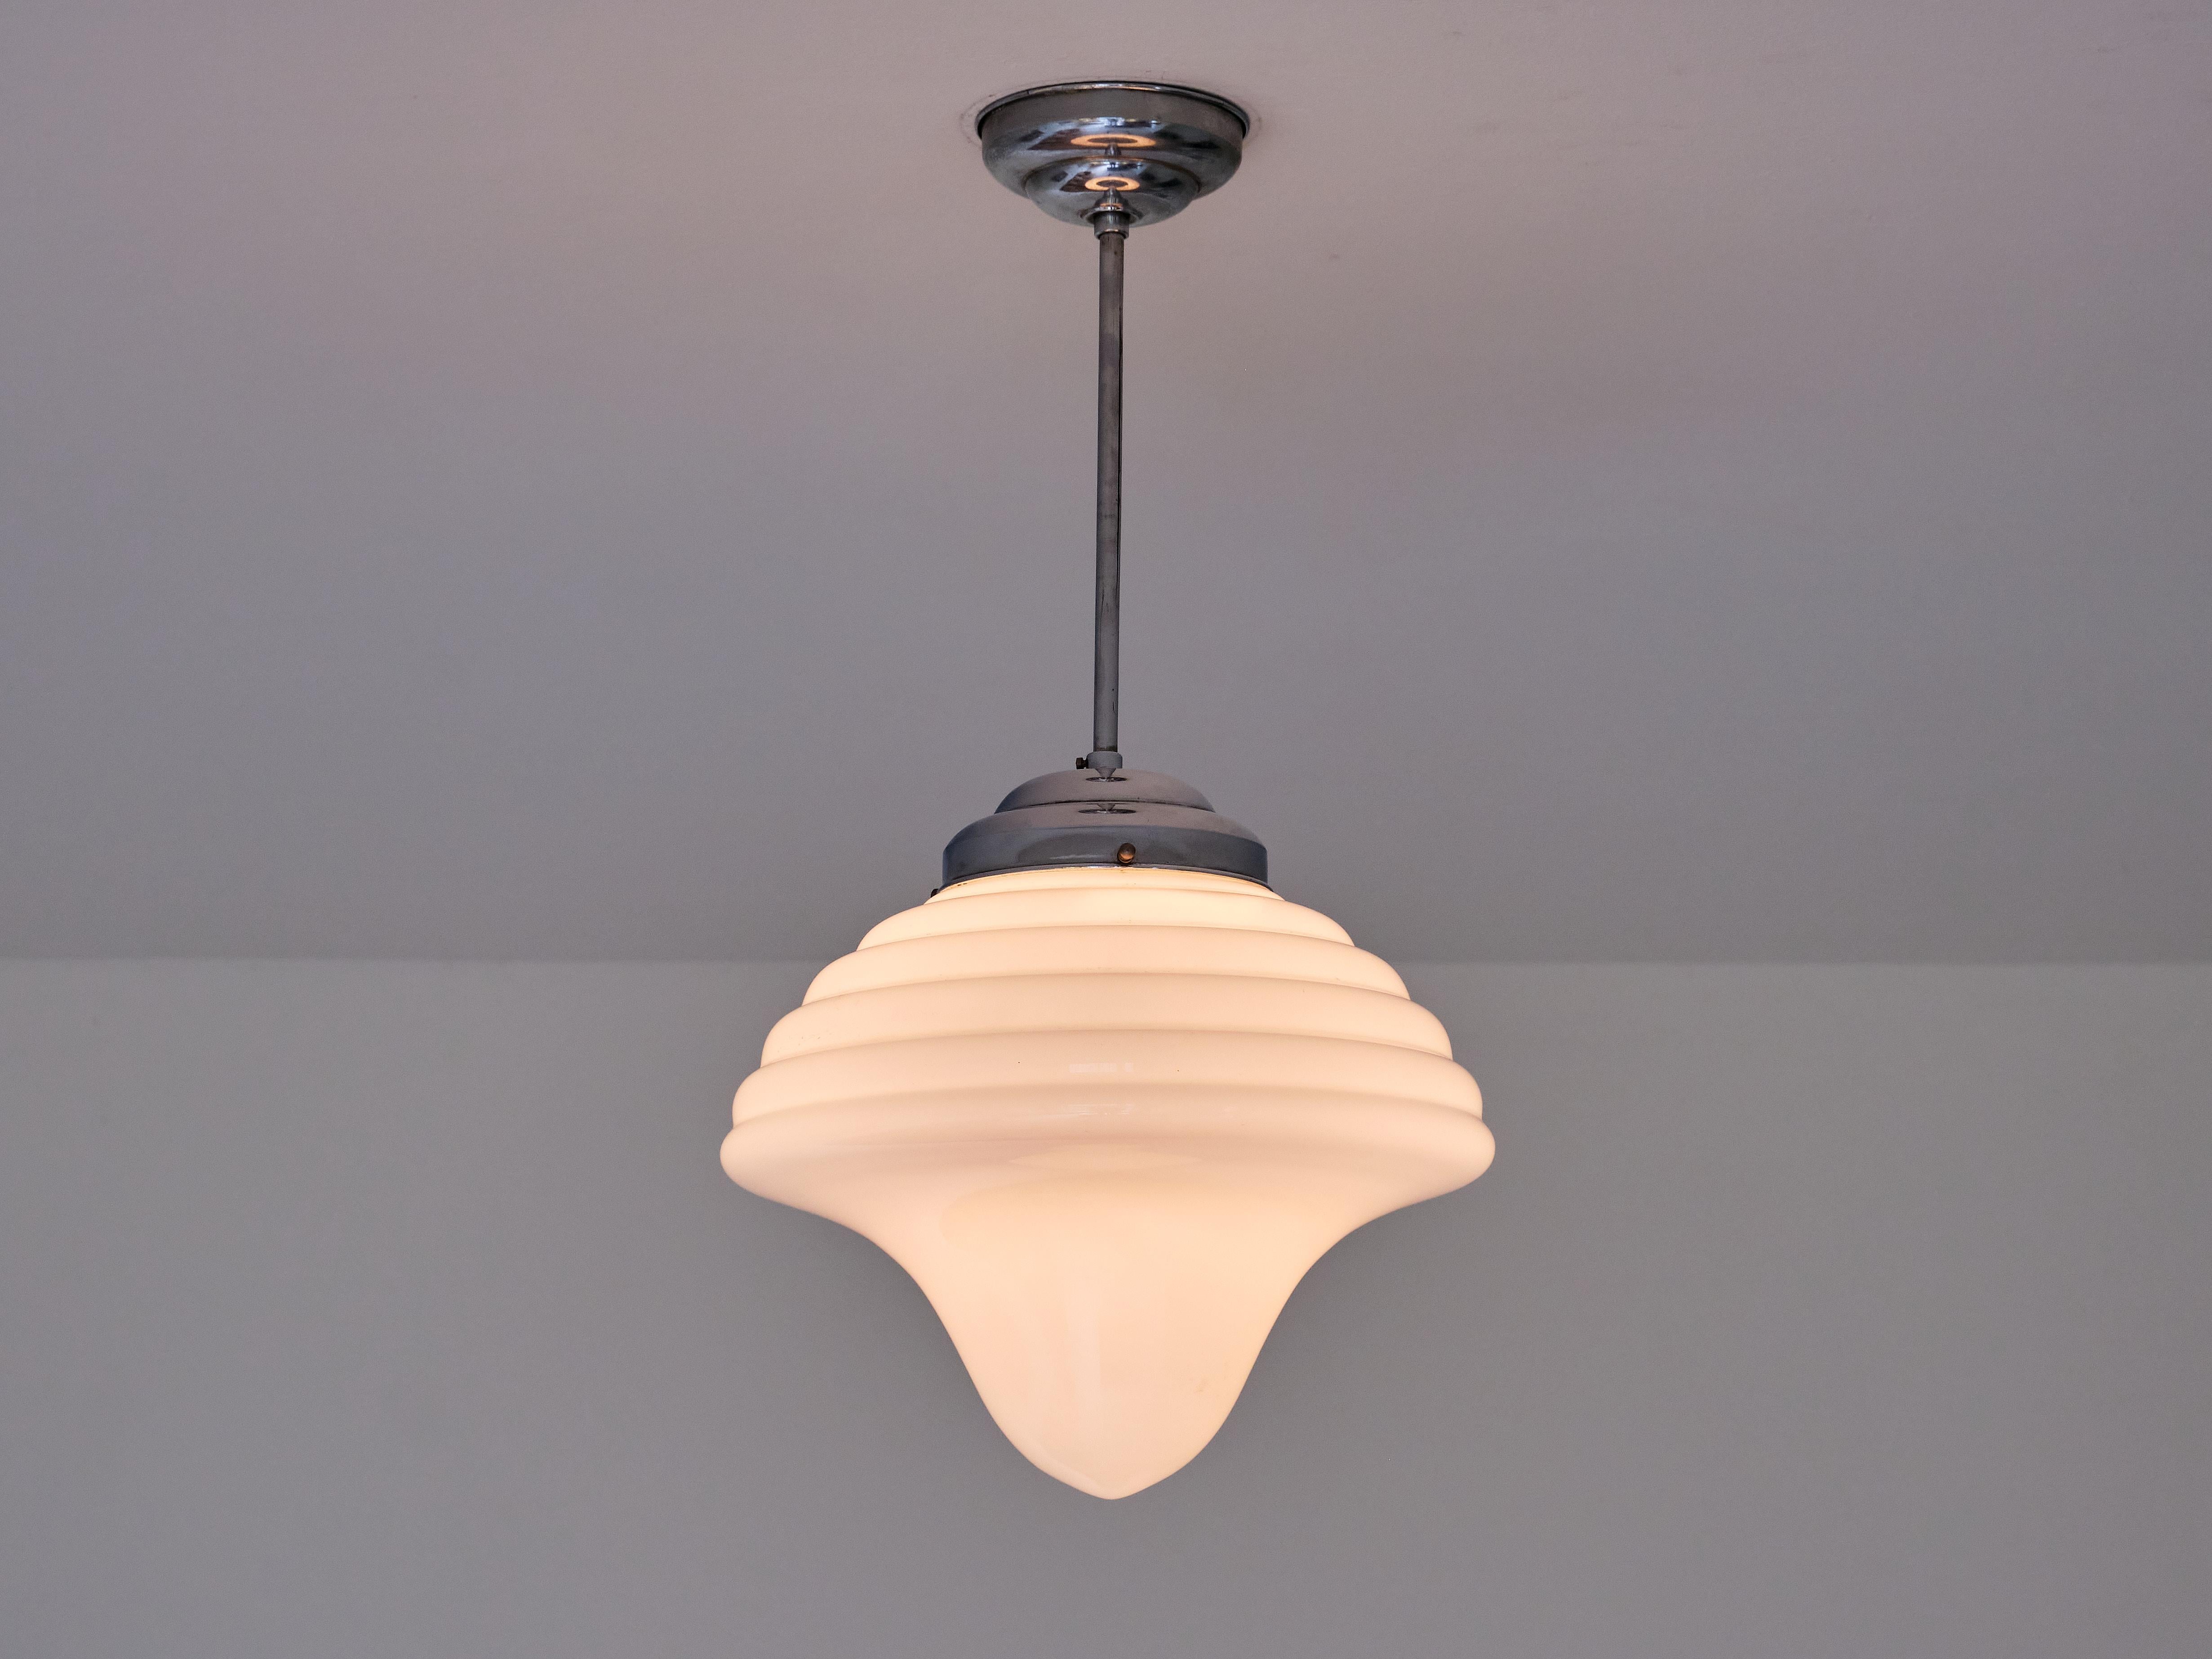 This rare pendant light was in The Netherlands in the 1960s. The Art Deco style of this design was introduced and distributed through various small-scale manufacturers from the 1930s onwards, with the most well known name being Gispen.
The striking